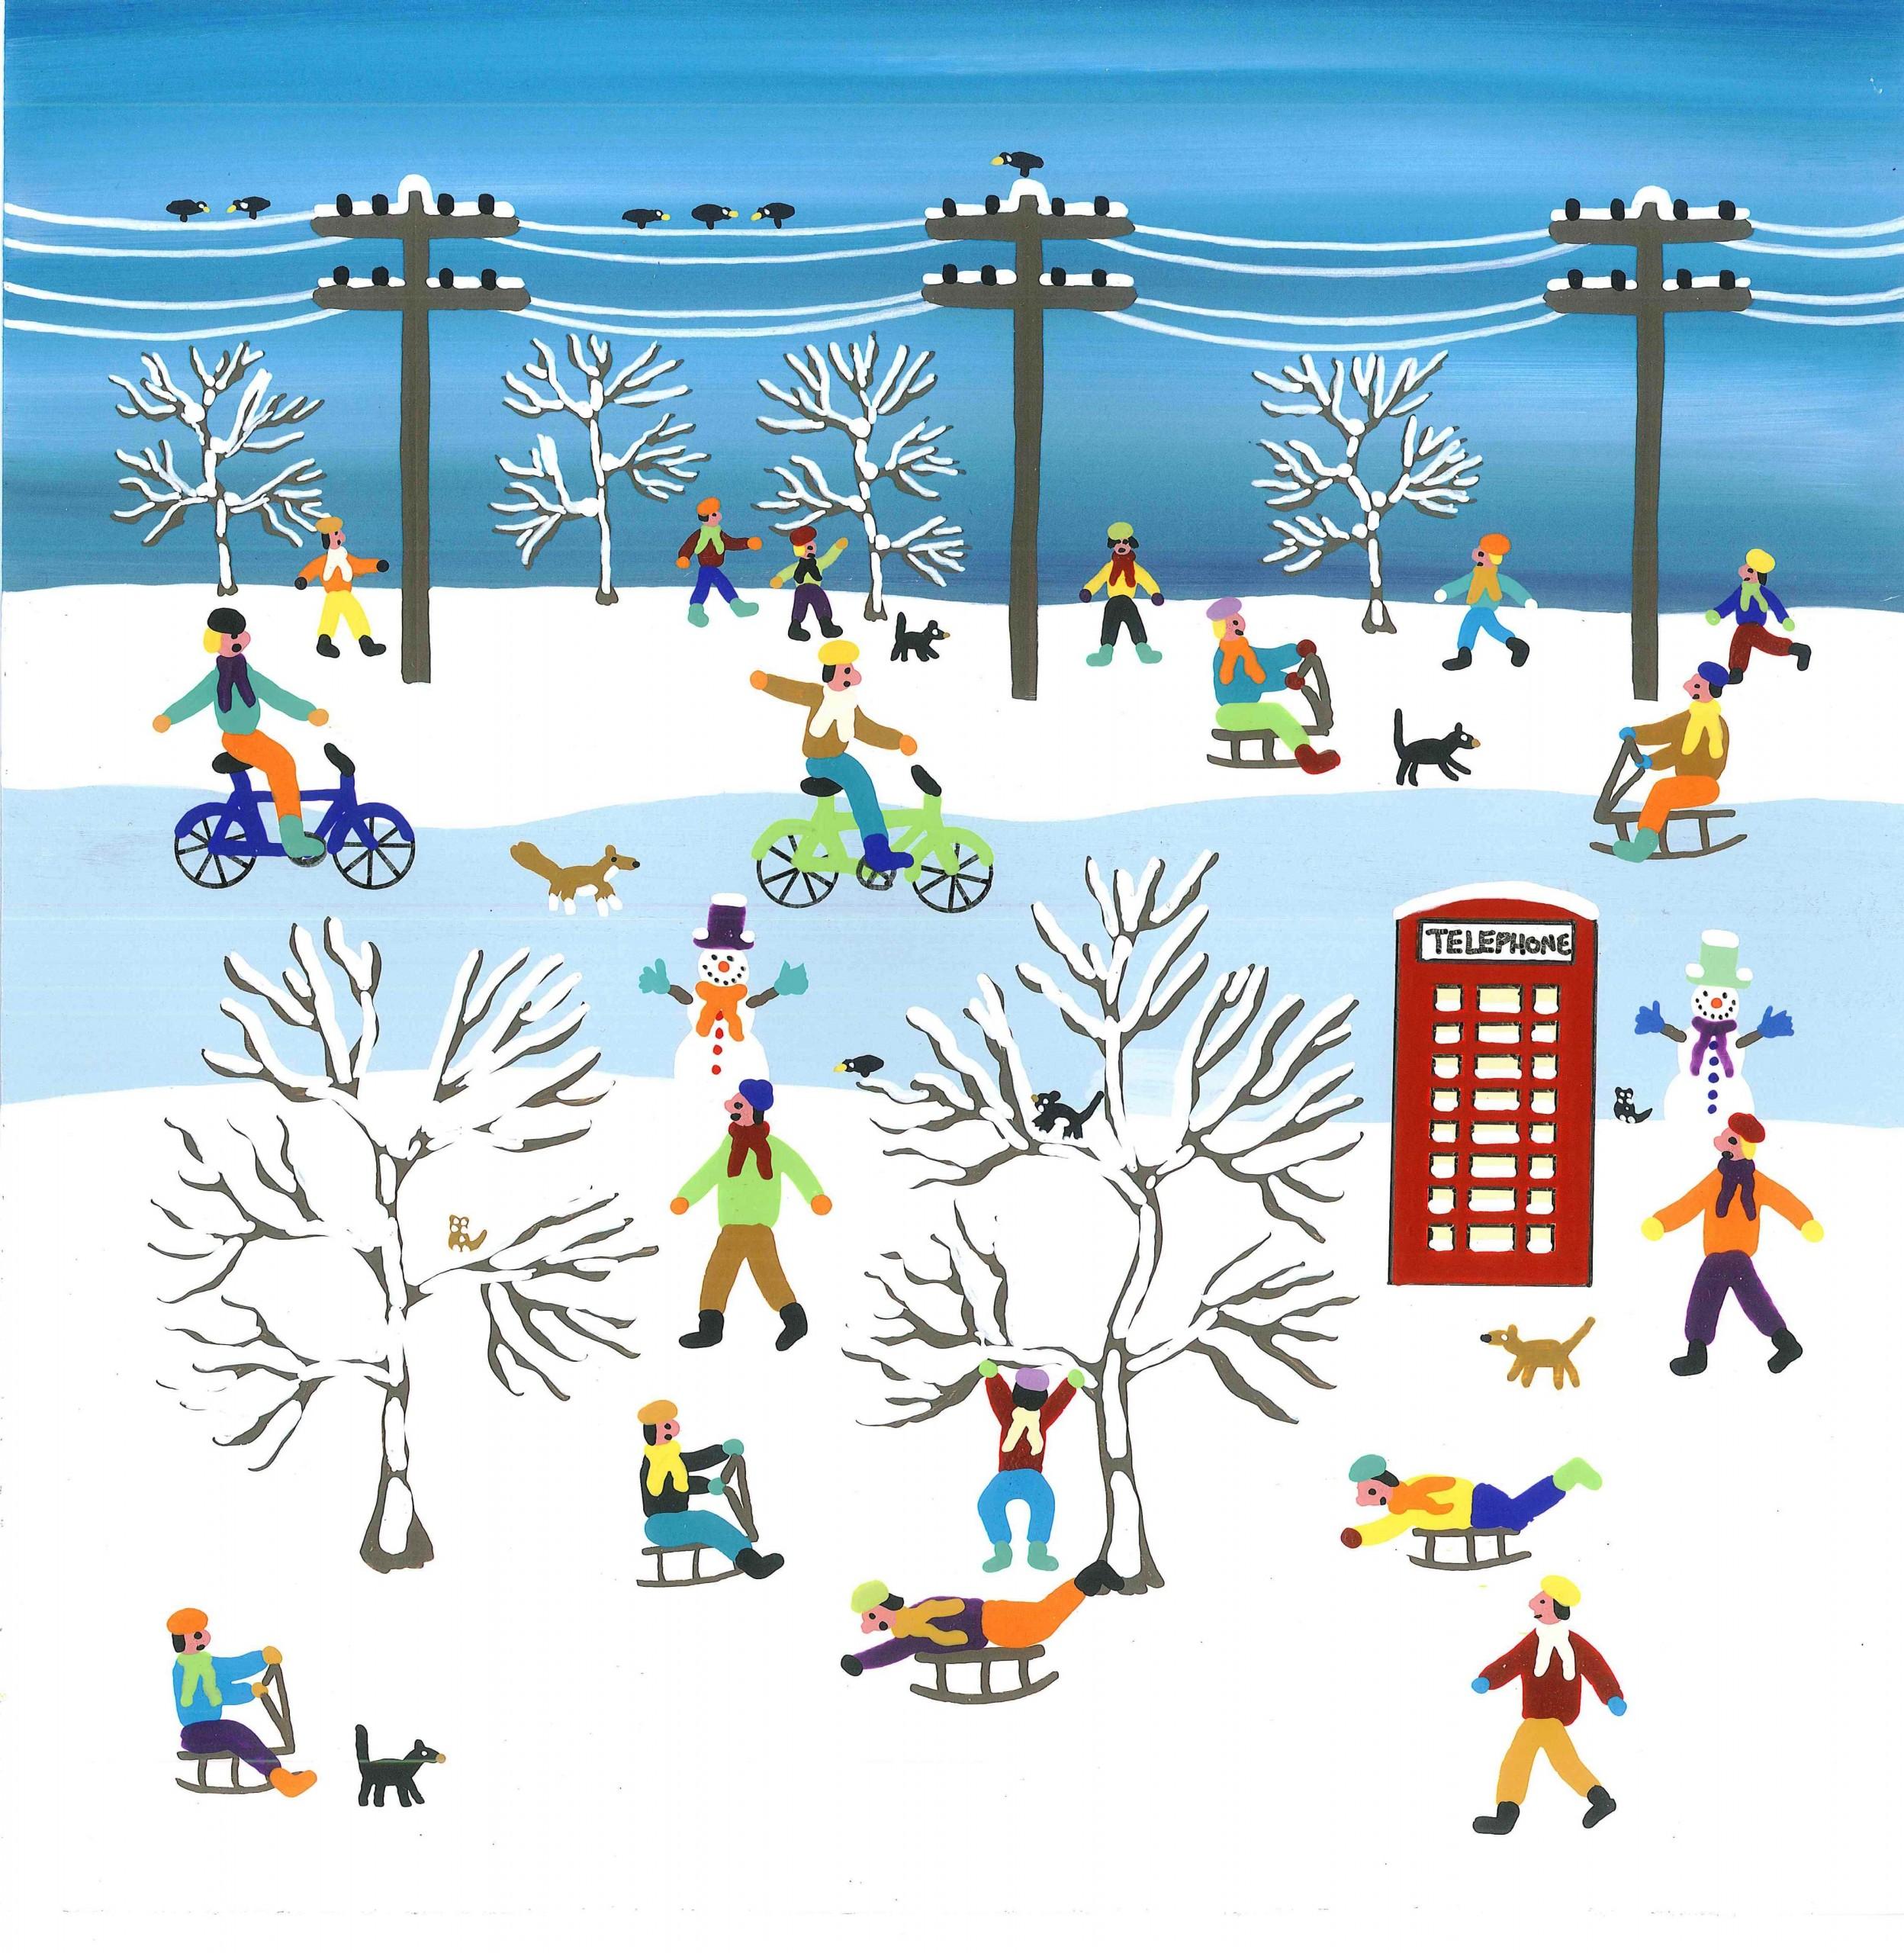 Fantastic day out in the snow,  sledging as fast as you can, riding your bike down the road with you best mate and your dog or just taking it easy on this wonderful snowy day

Snowmen, snowscape, people, landscapes, cats and dogs, happy art

Gordon